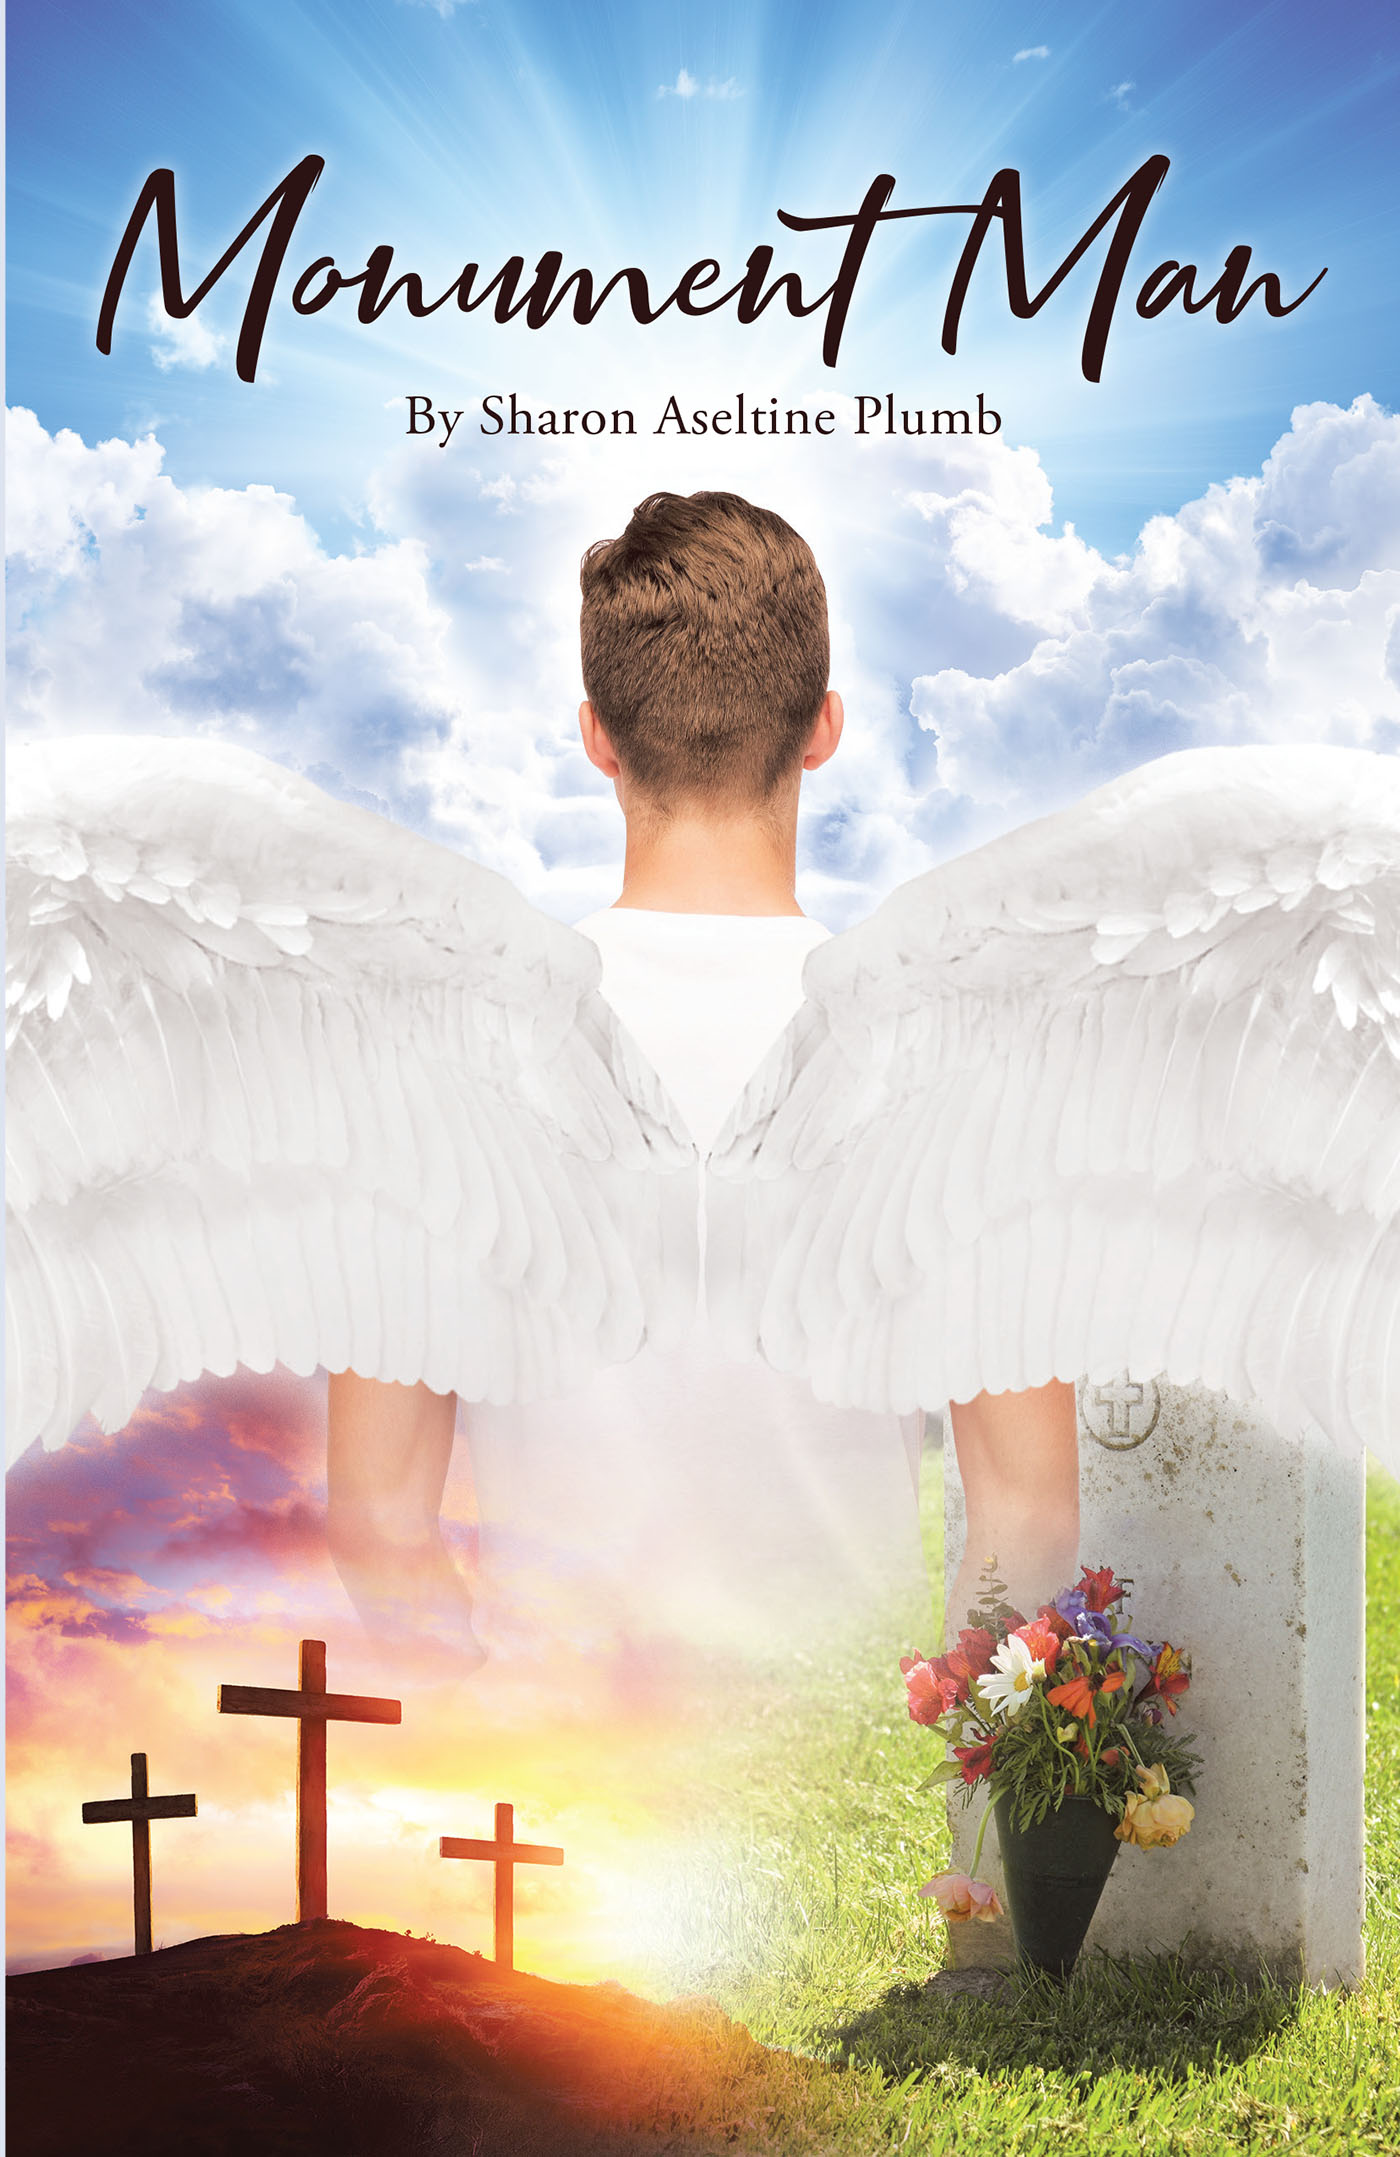 Author Sharon Aseltine Plumb’s New Book, "Monument Man," is a Powerful Look at the Incredible Healing Power of the Lord and His Scripture to Overcome Loss and Pain